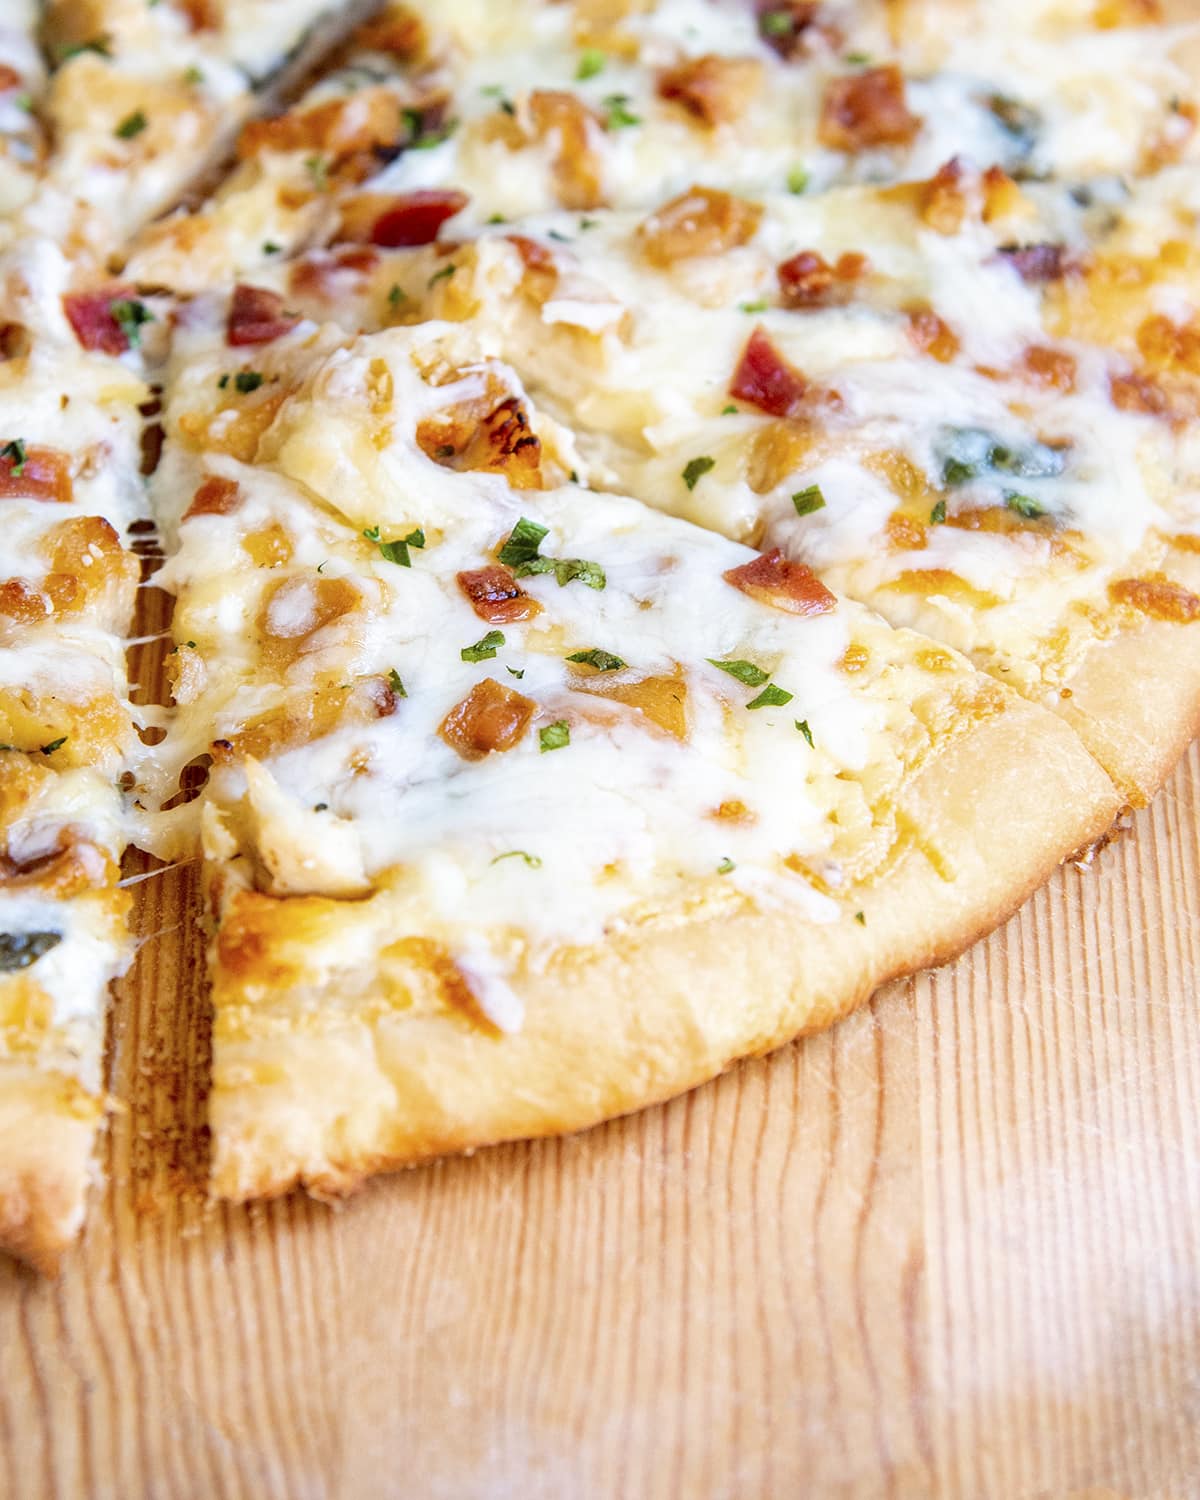 A slice of pizza topped with mozzarella cheese, chicken, bacon, and chopped parsley.